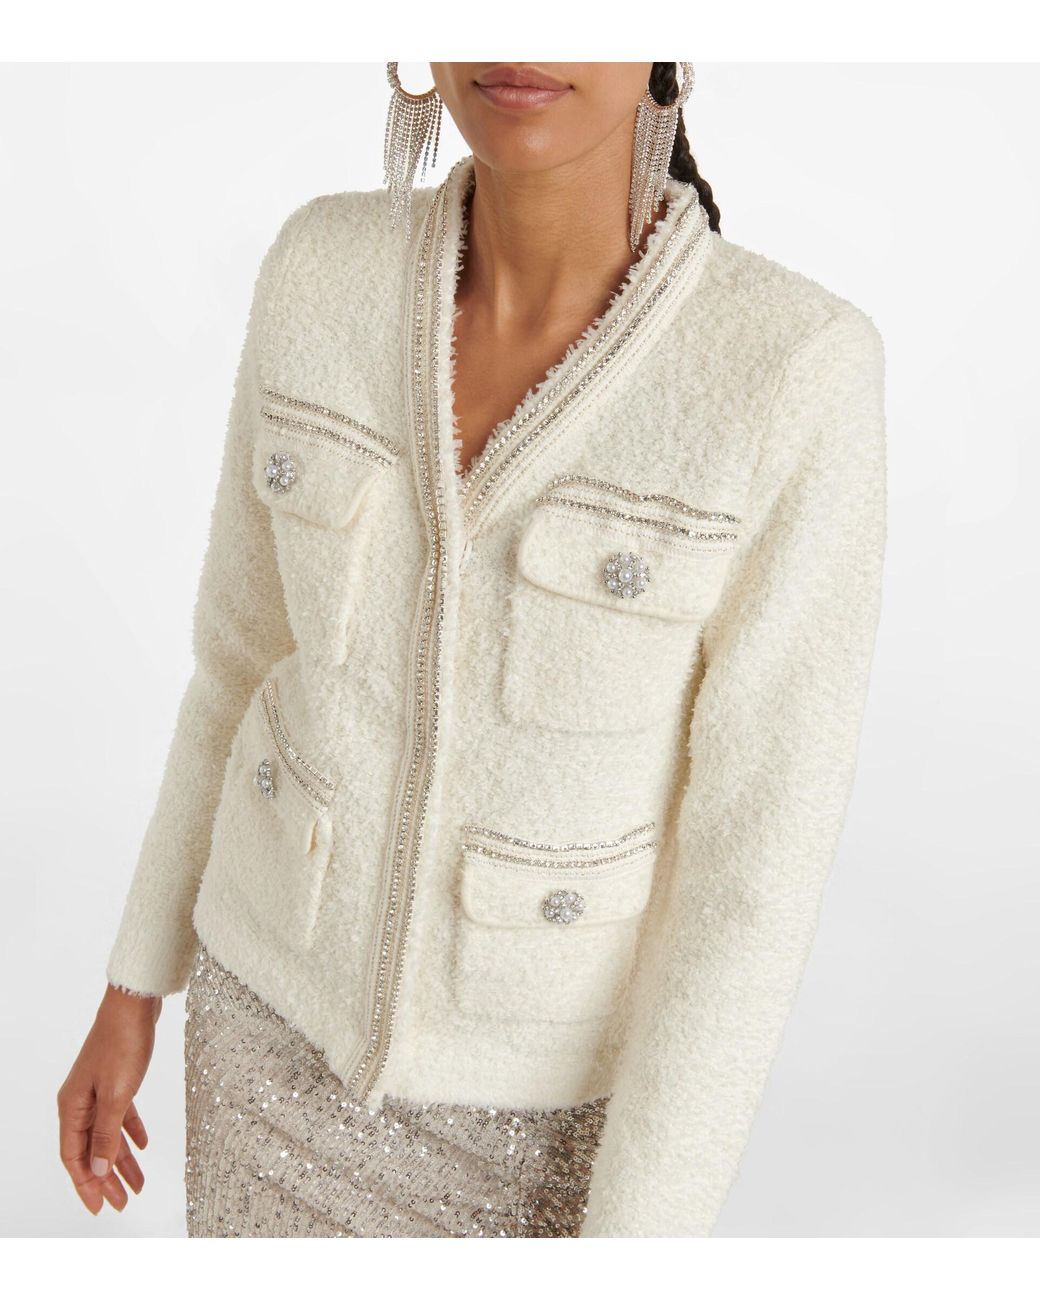 Self-Portrait Embellished Boucle Cardigan in White